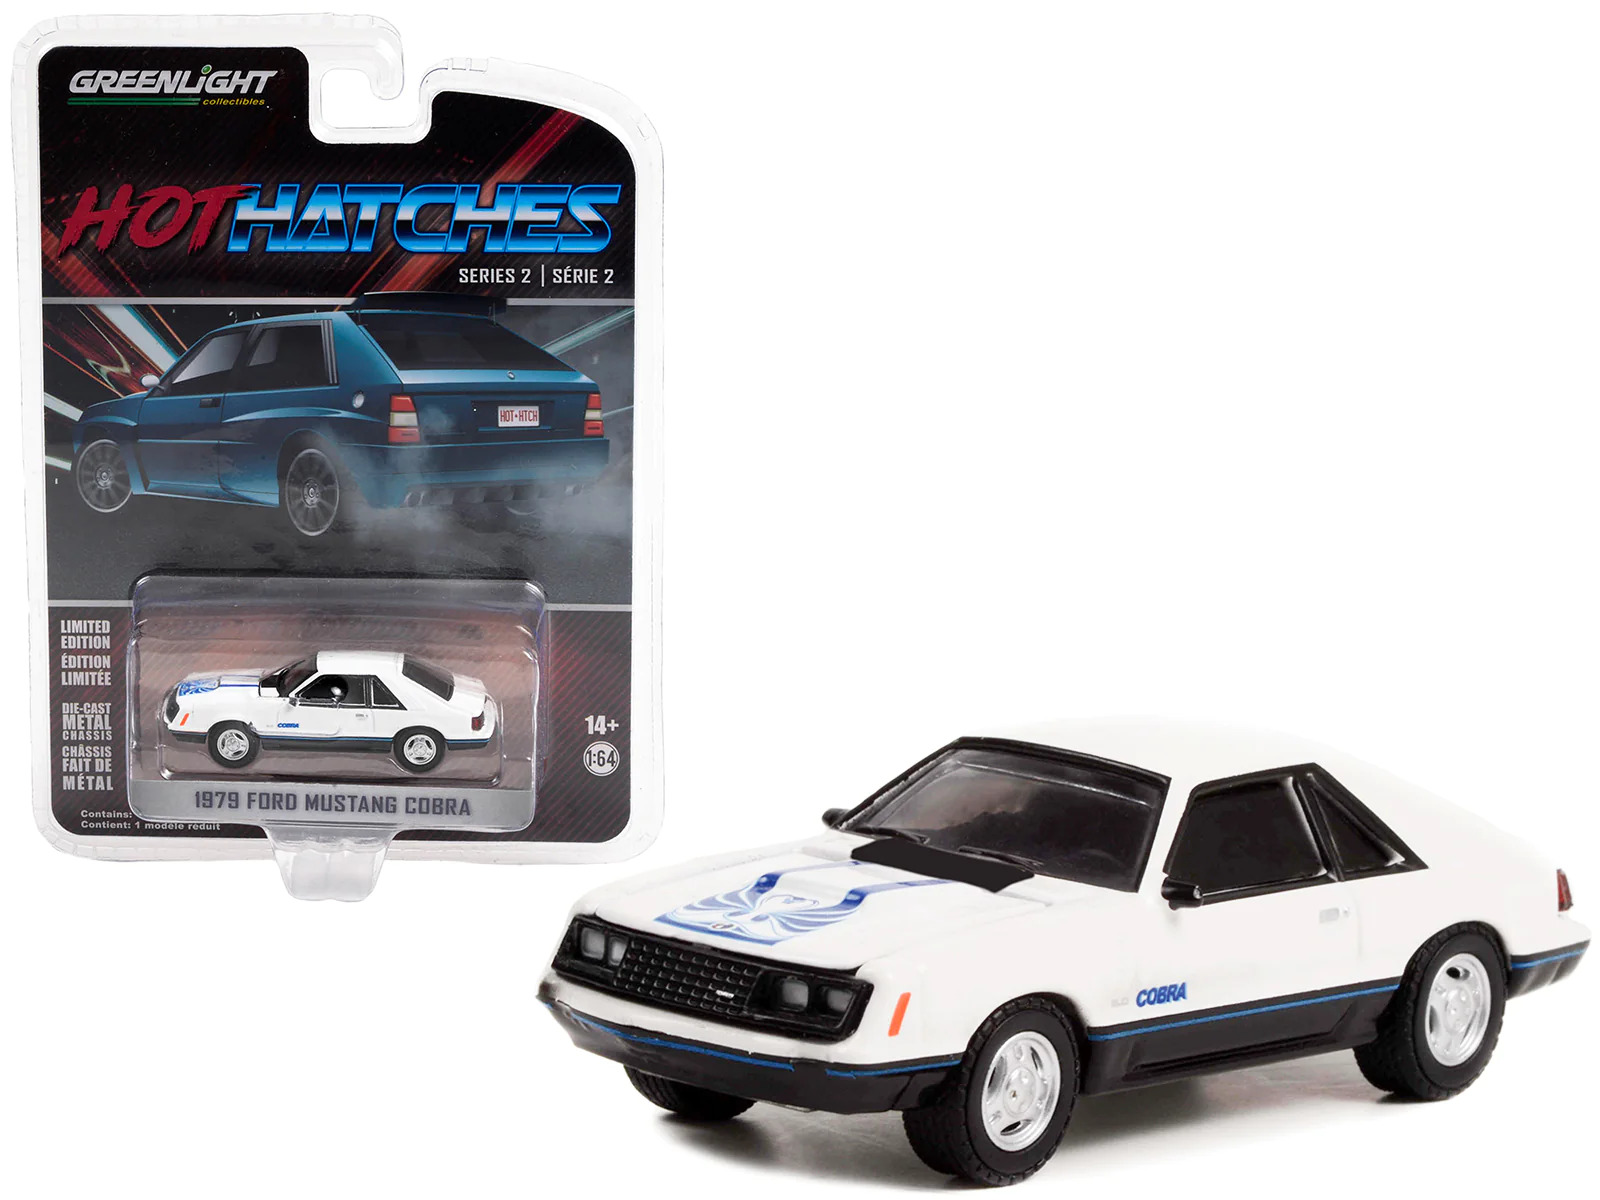 1979 Ford Mustang Cobra Glow Hatches 1/64 Diecast Model Car